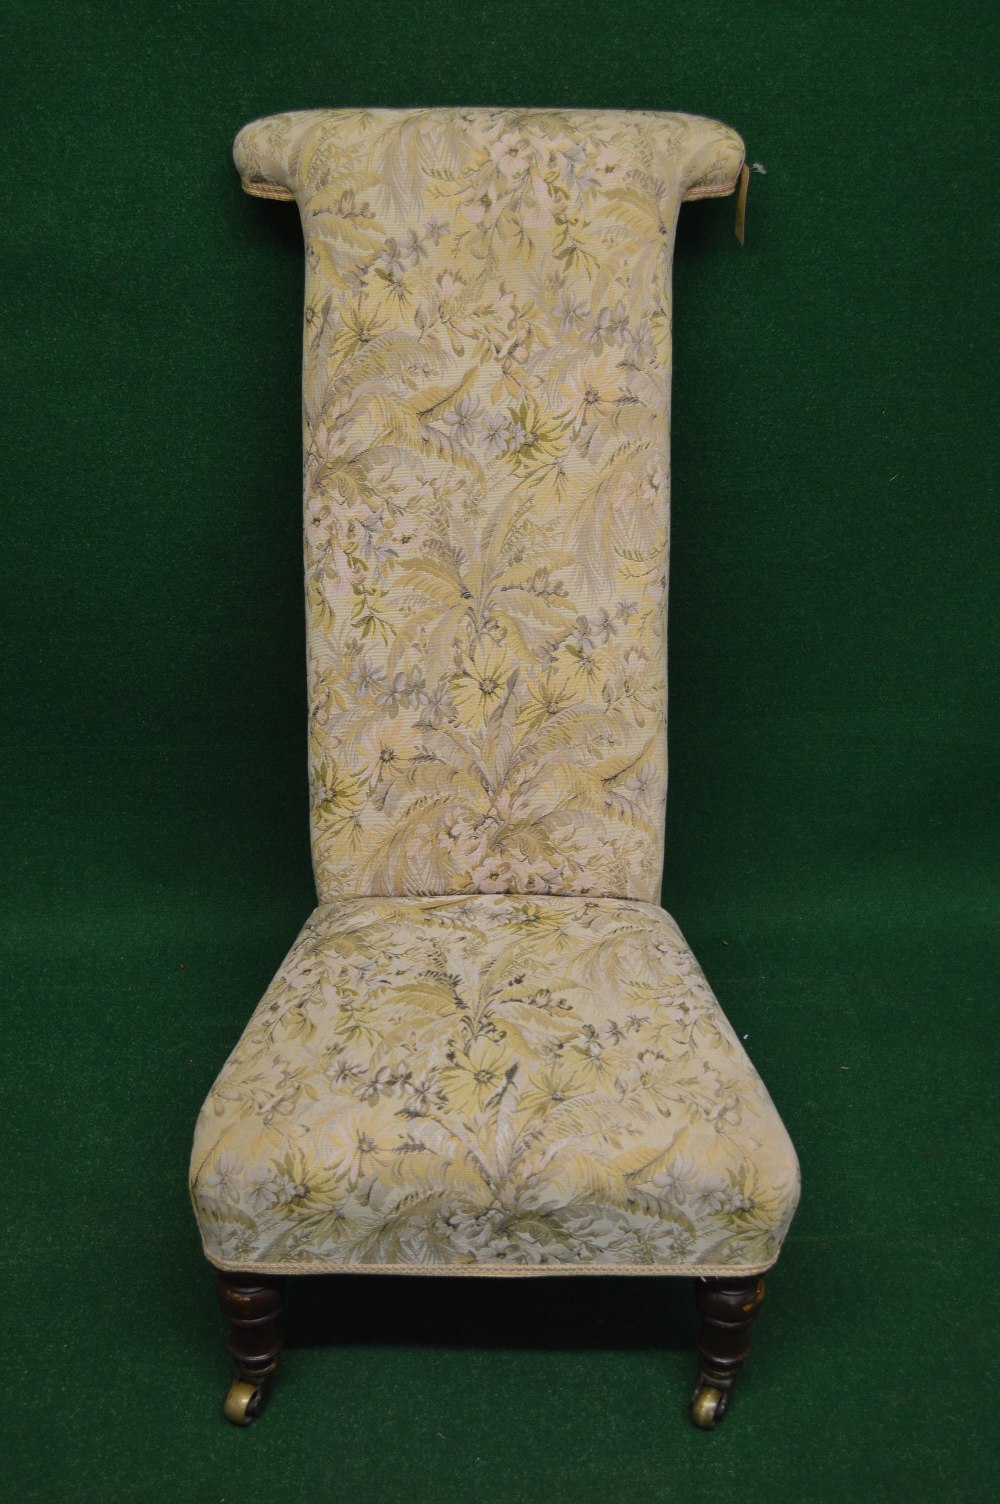 A prie dieu chair having floral upholstery and standing on turned legs ending i n brass castors